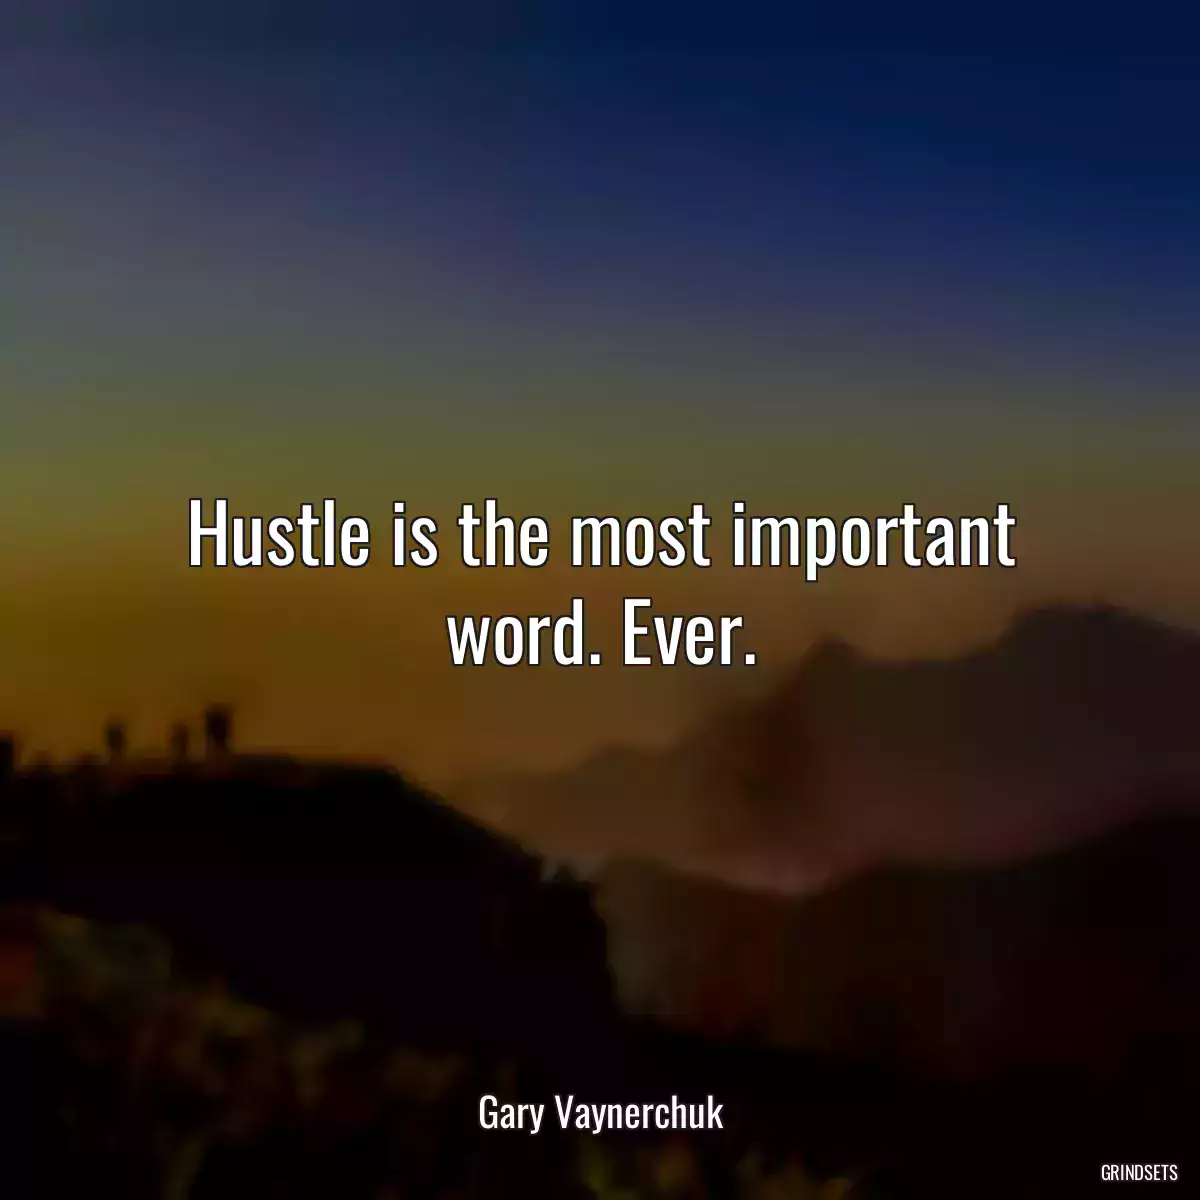 Hustle is the most important word. Ever.